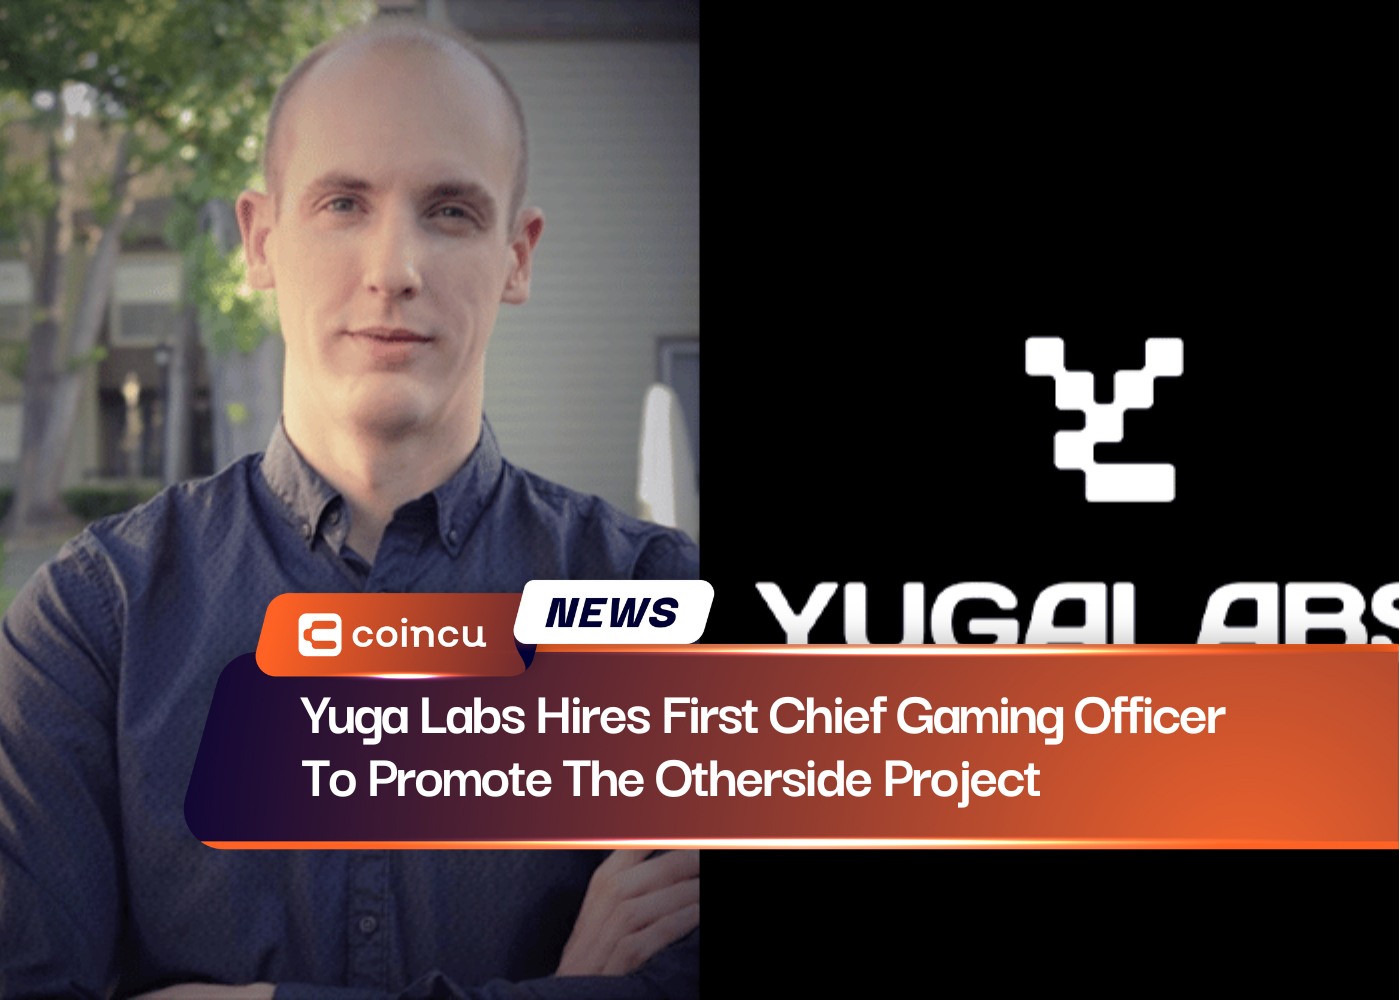 Yuga Labs Hires First Chief Gaming Officer To Promote The Otherside Project